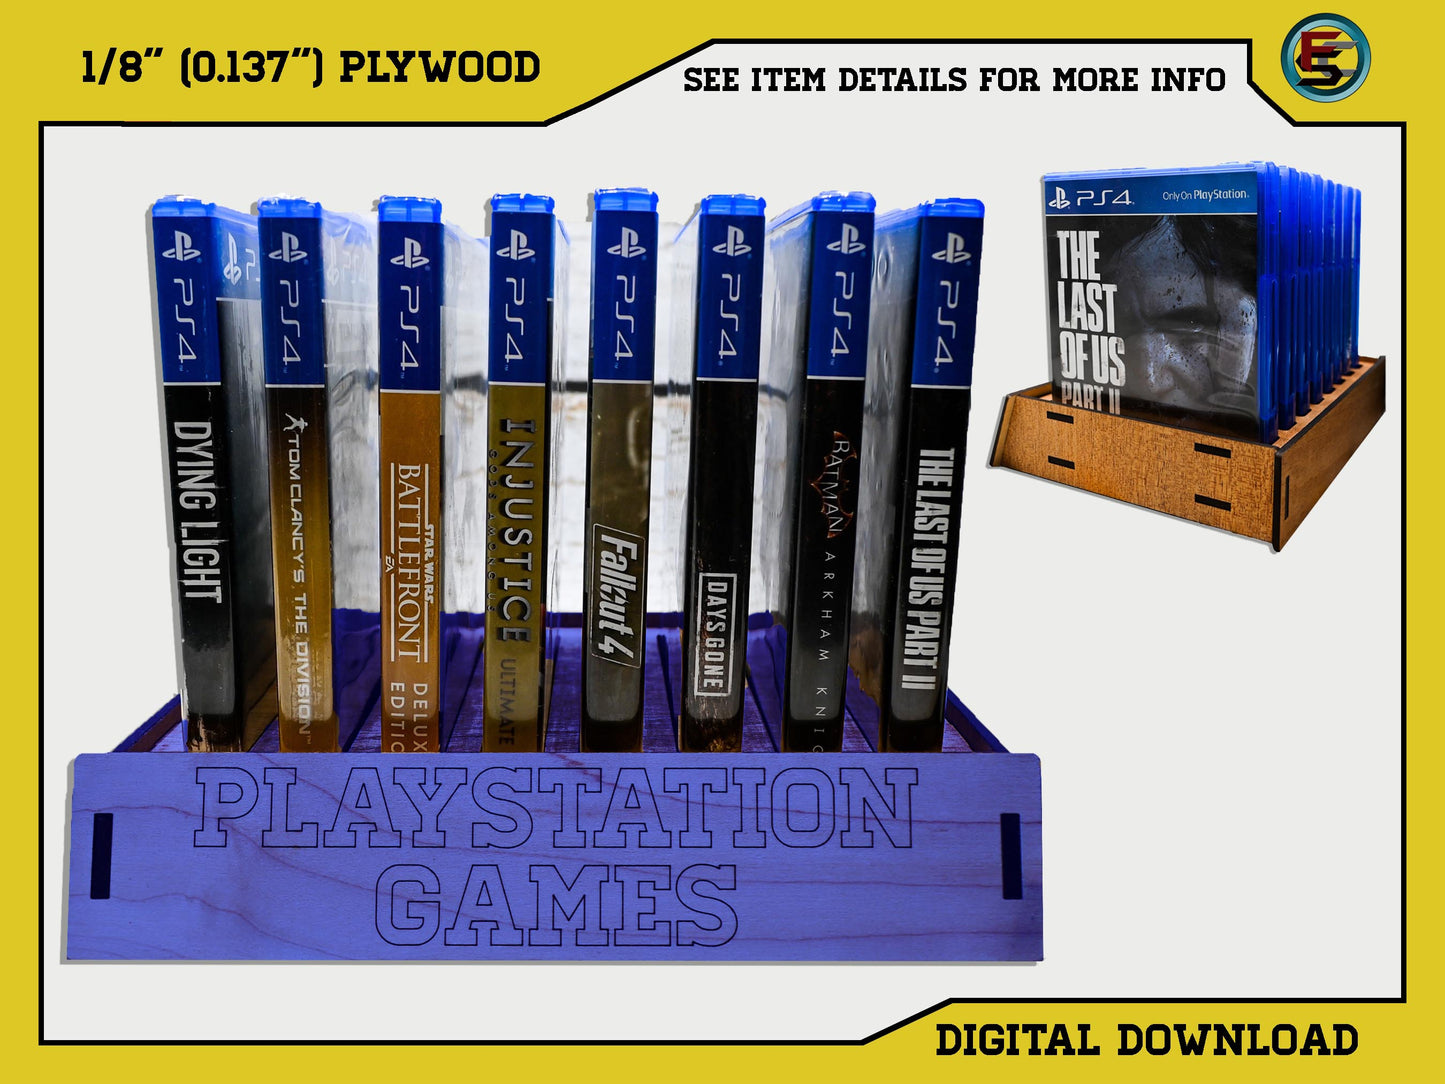 Display Stand for PlayStation Game Boxes